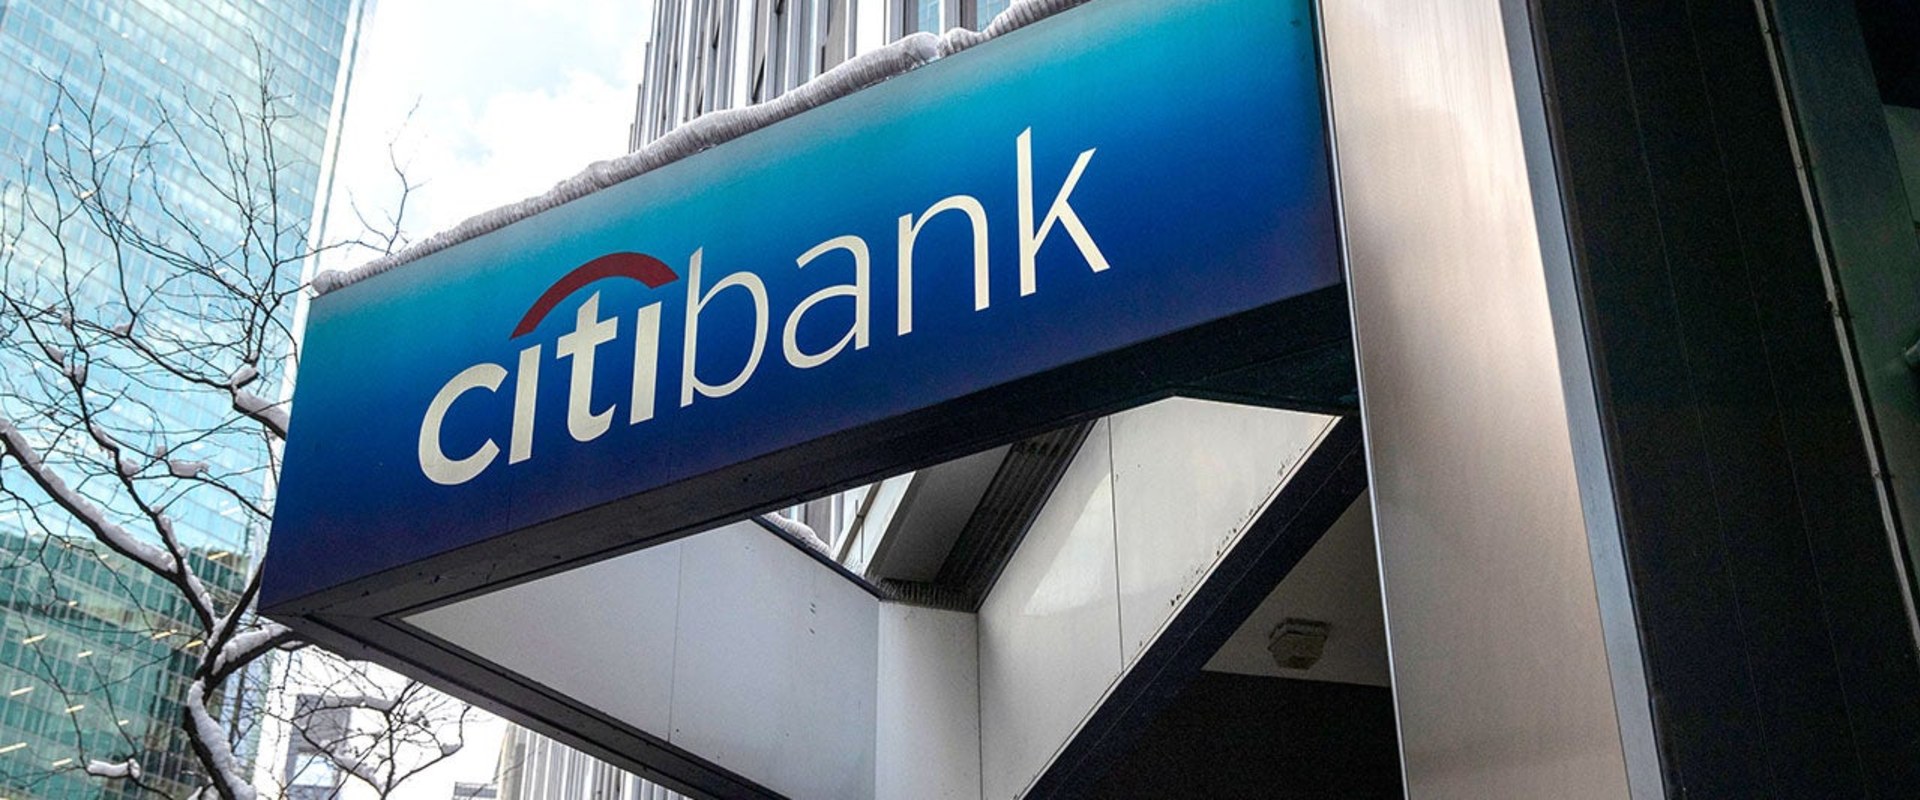 What is the Relationship Between Travelers Insurance and Citibank?